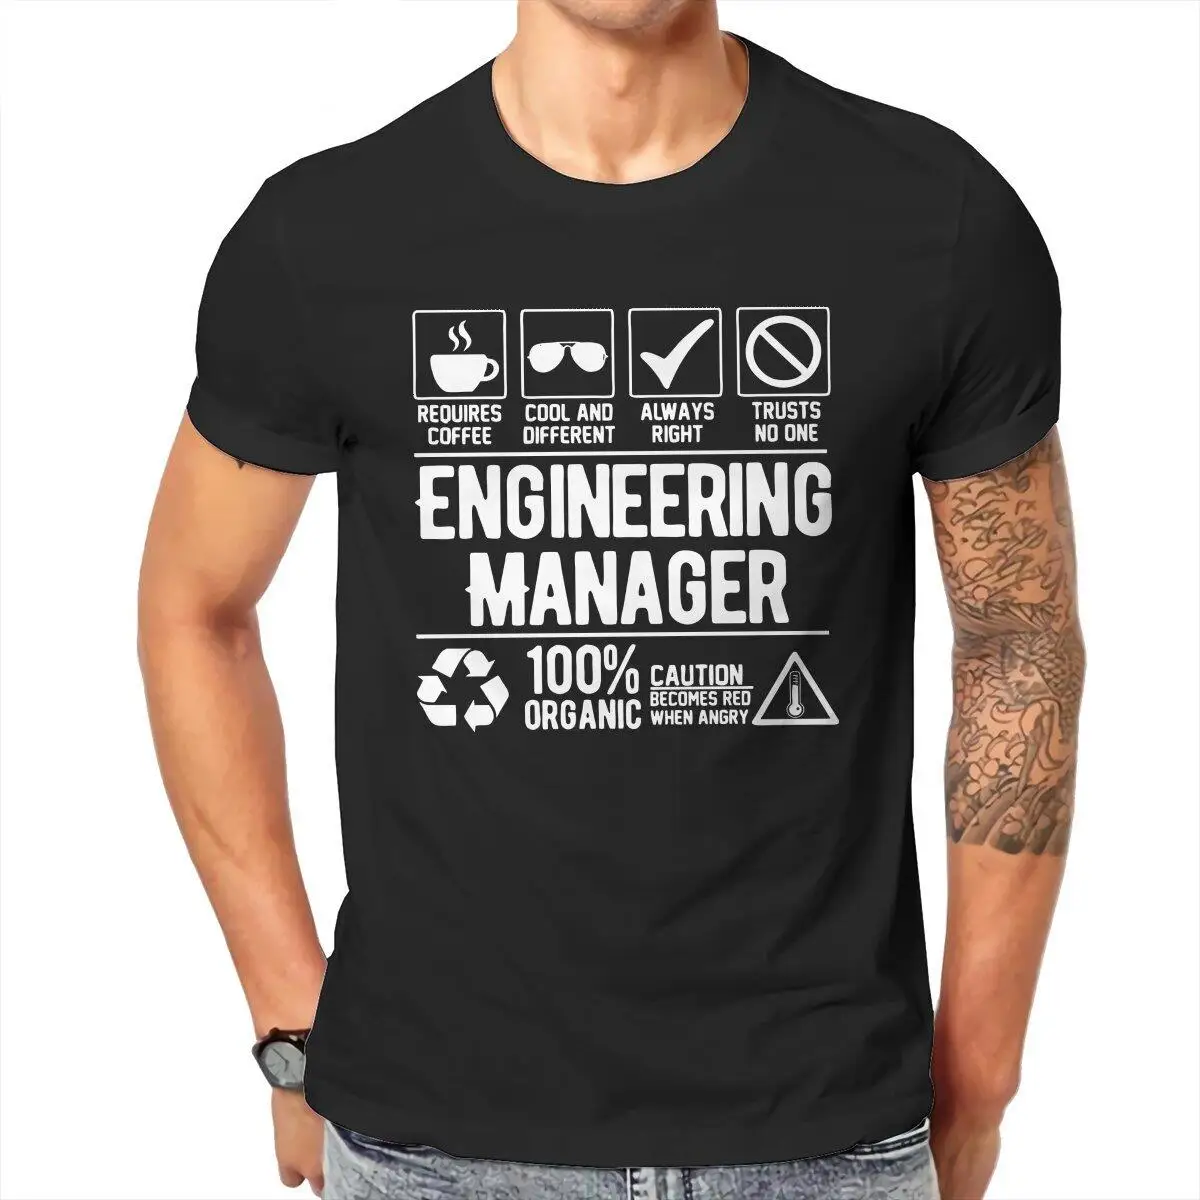 Engineering Manager  T-Shirt for Men Math Lovers Funny 100% Cotton Tee Shirt Crewneck Short Sleeve T Shirts Plus Size Clothes